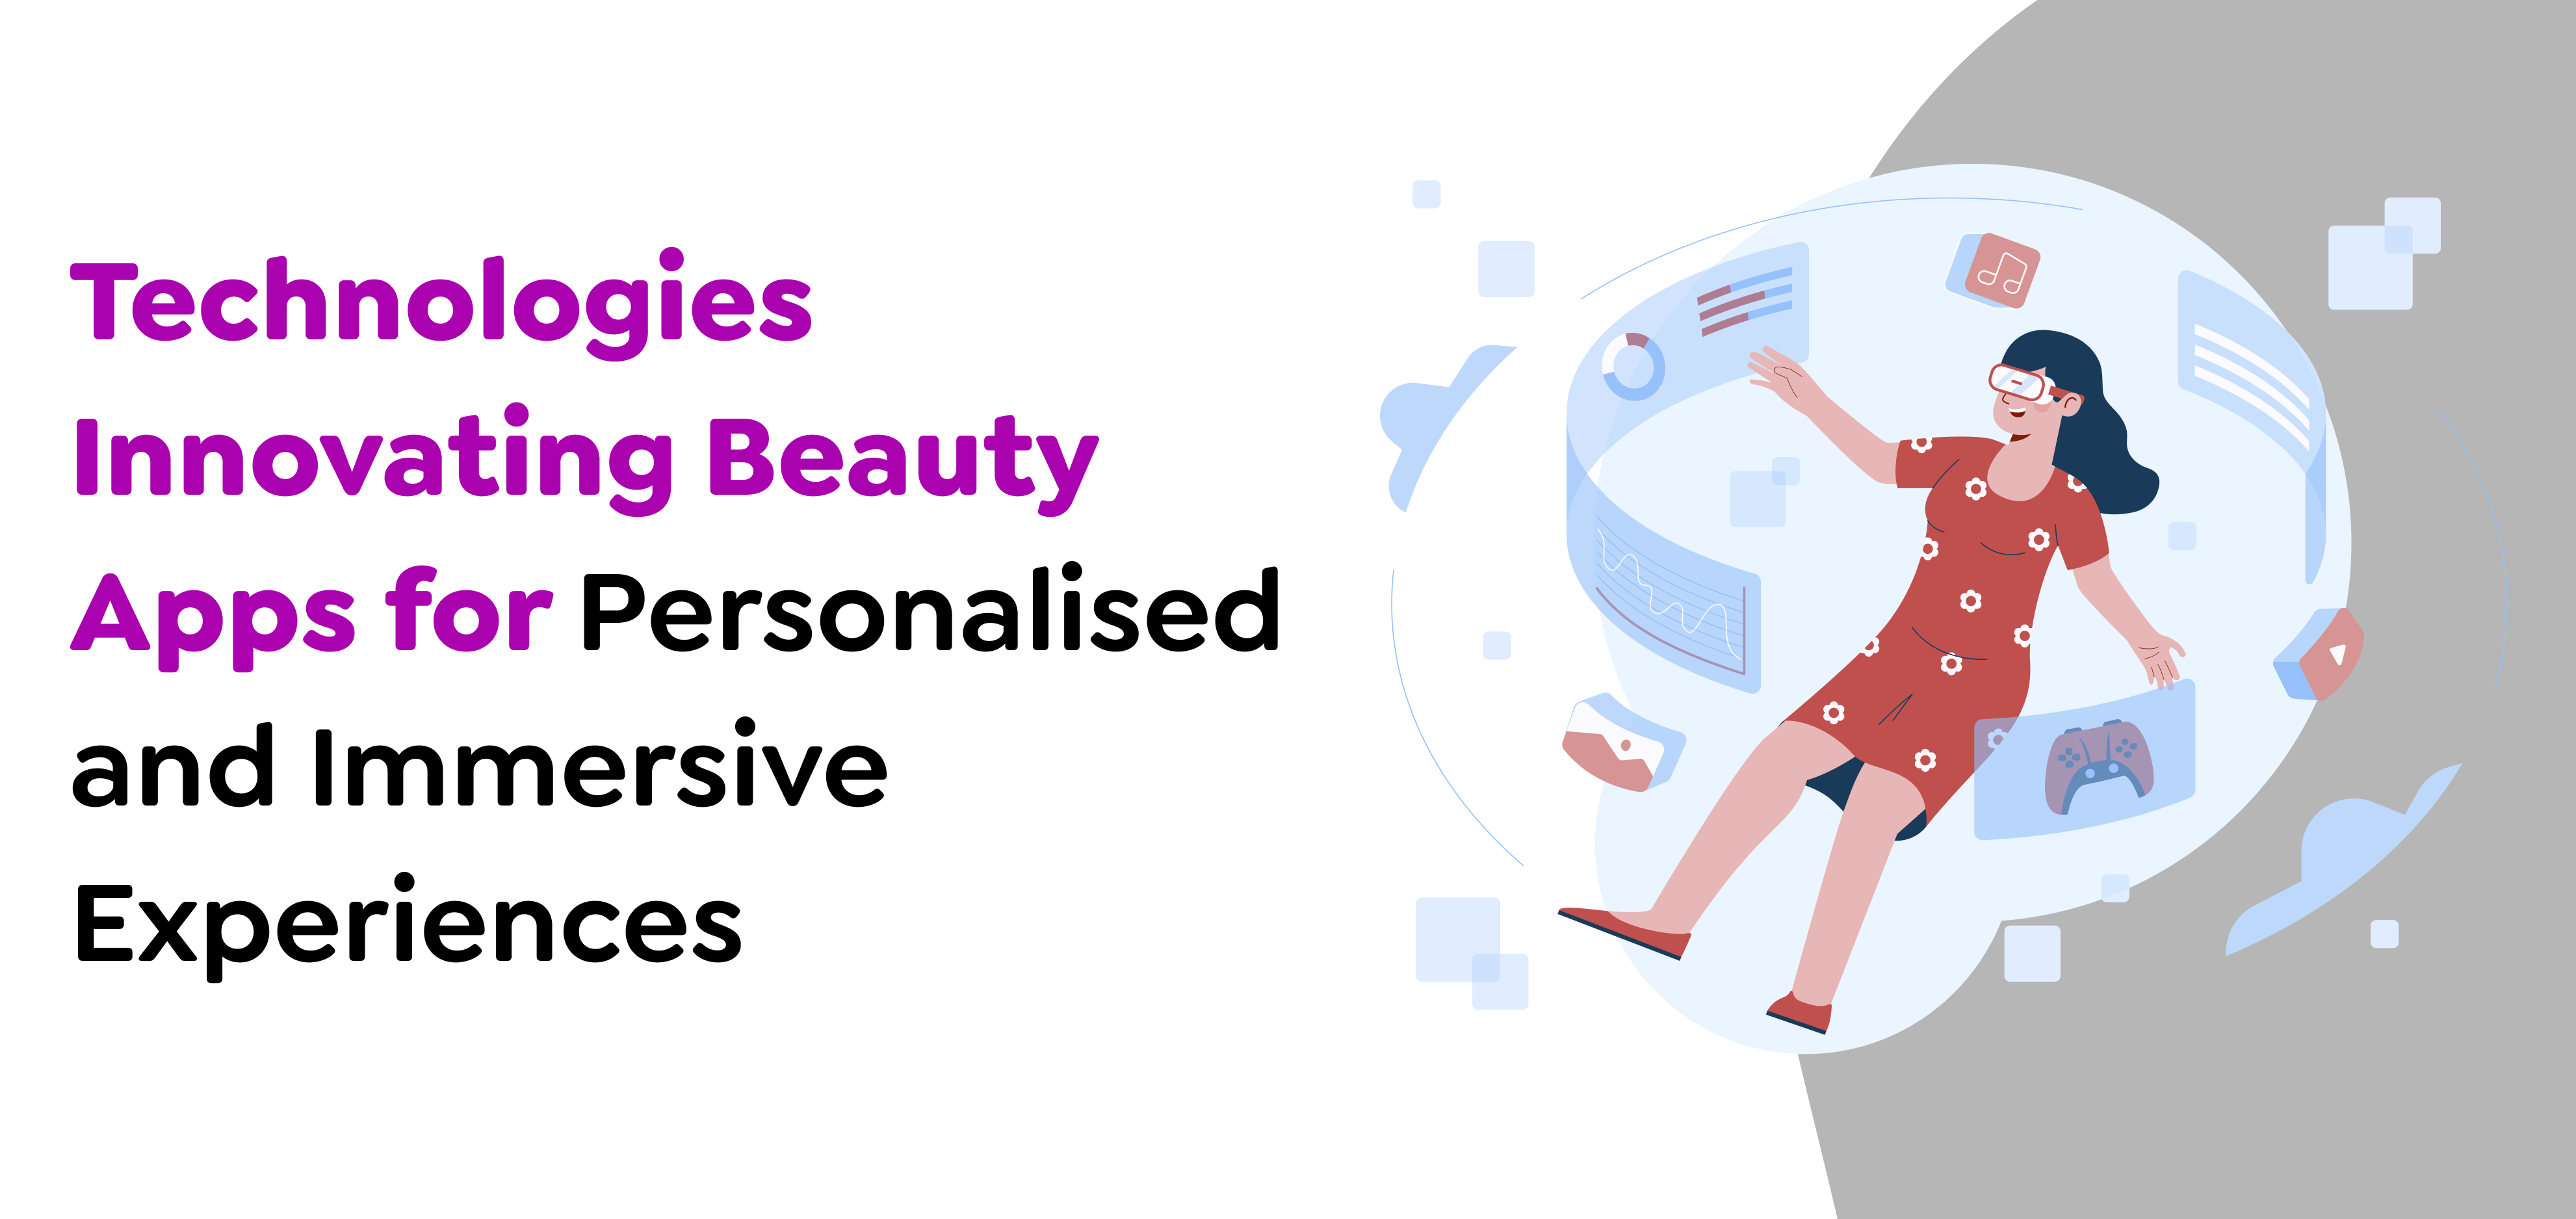 Technologies Innovating Beauty Apps